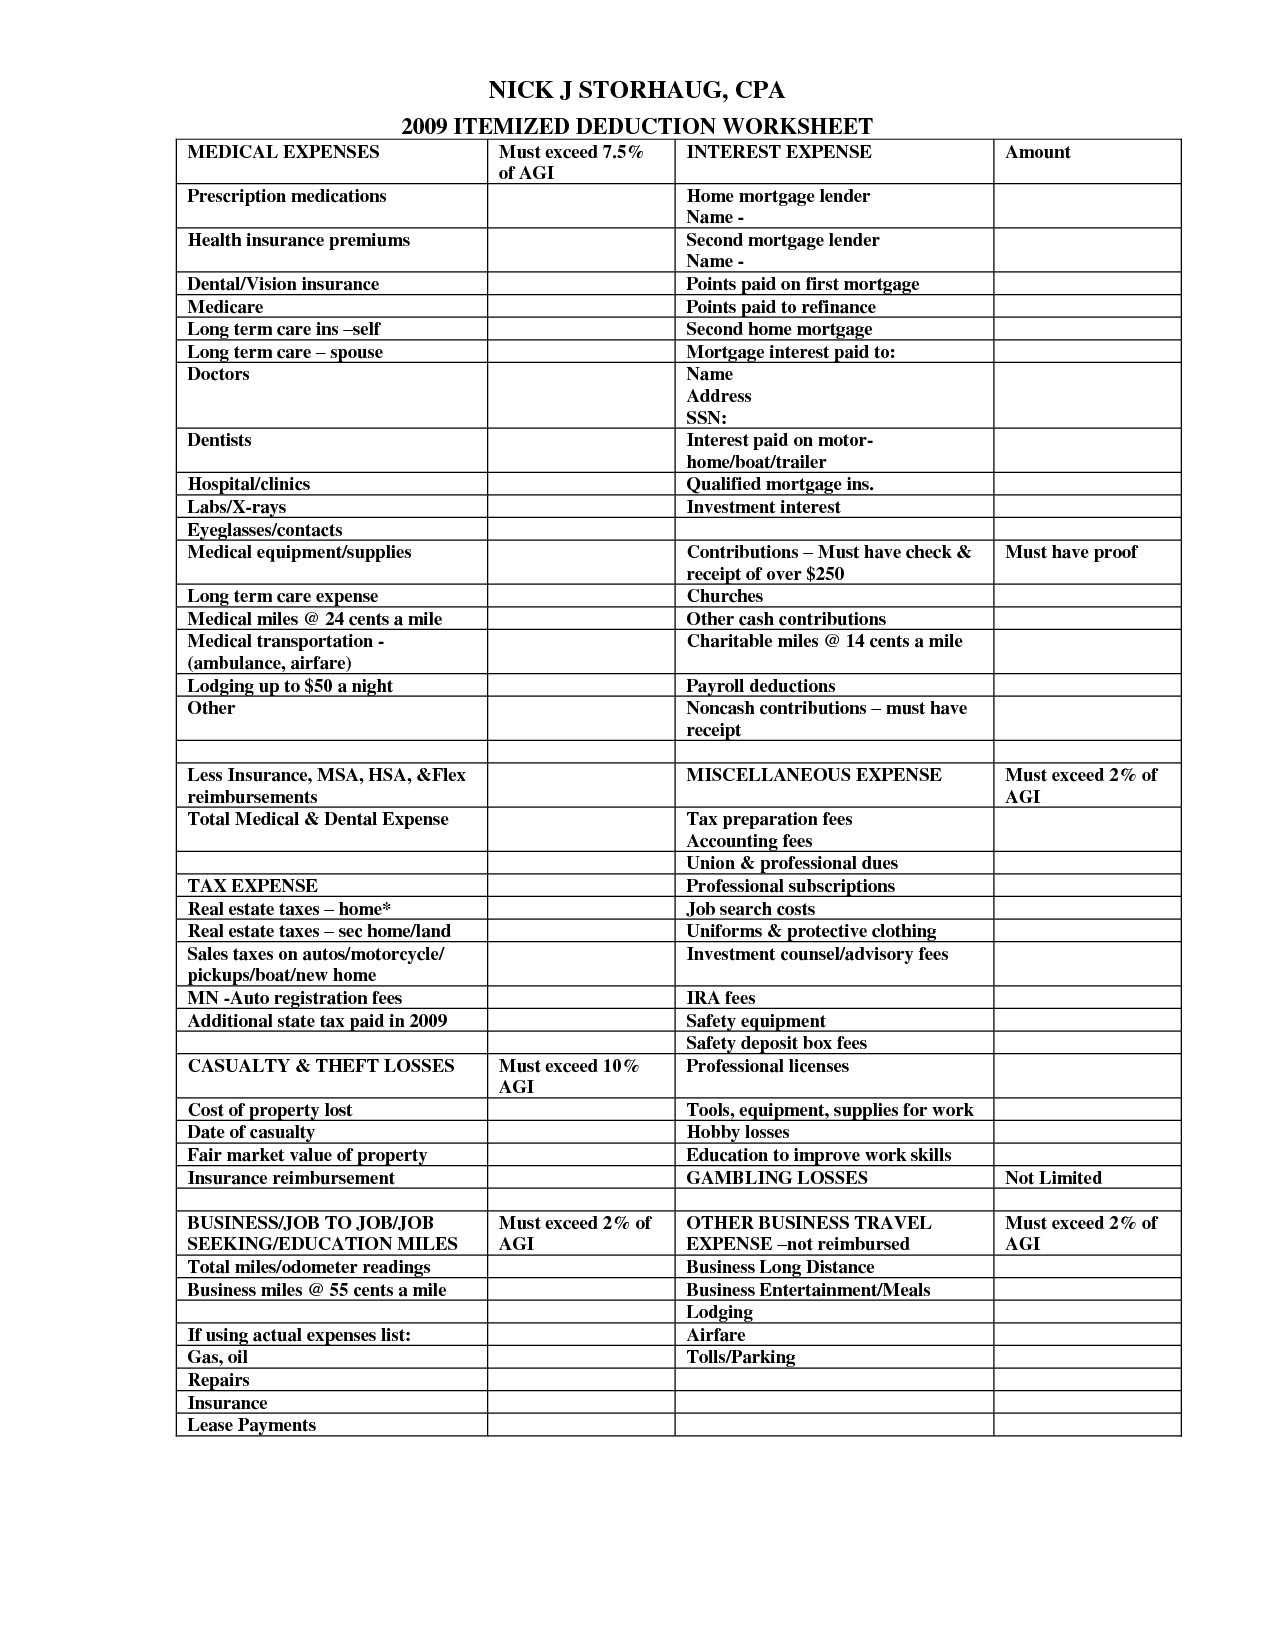 14 Best Images of IRS Itemized Deductions Worksheet  Tax Itemized Deduction Worksheet, 2015 